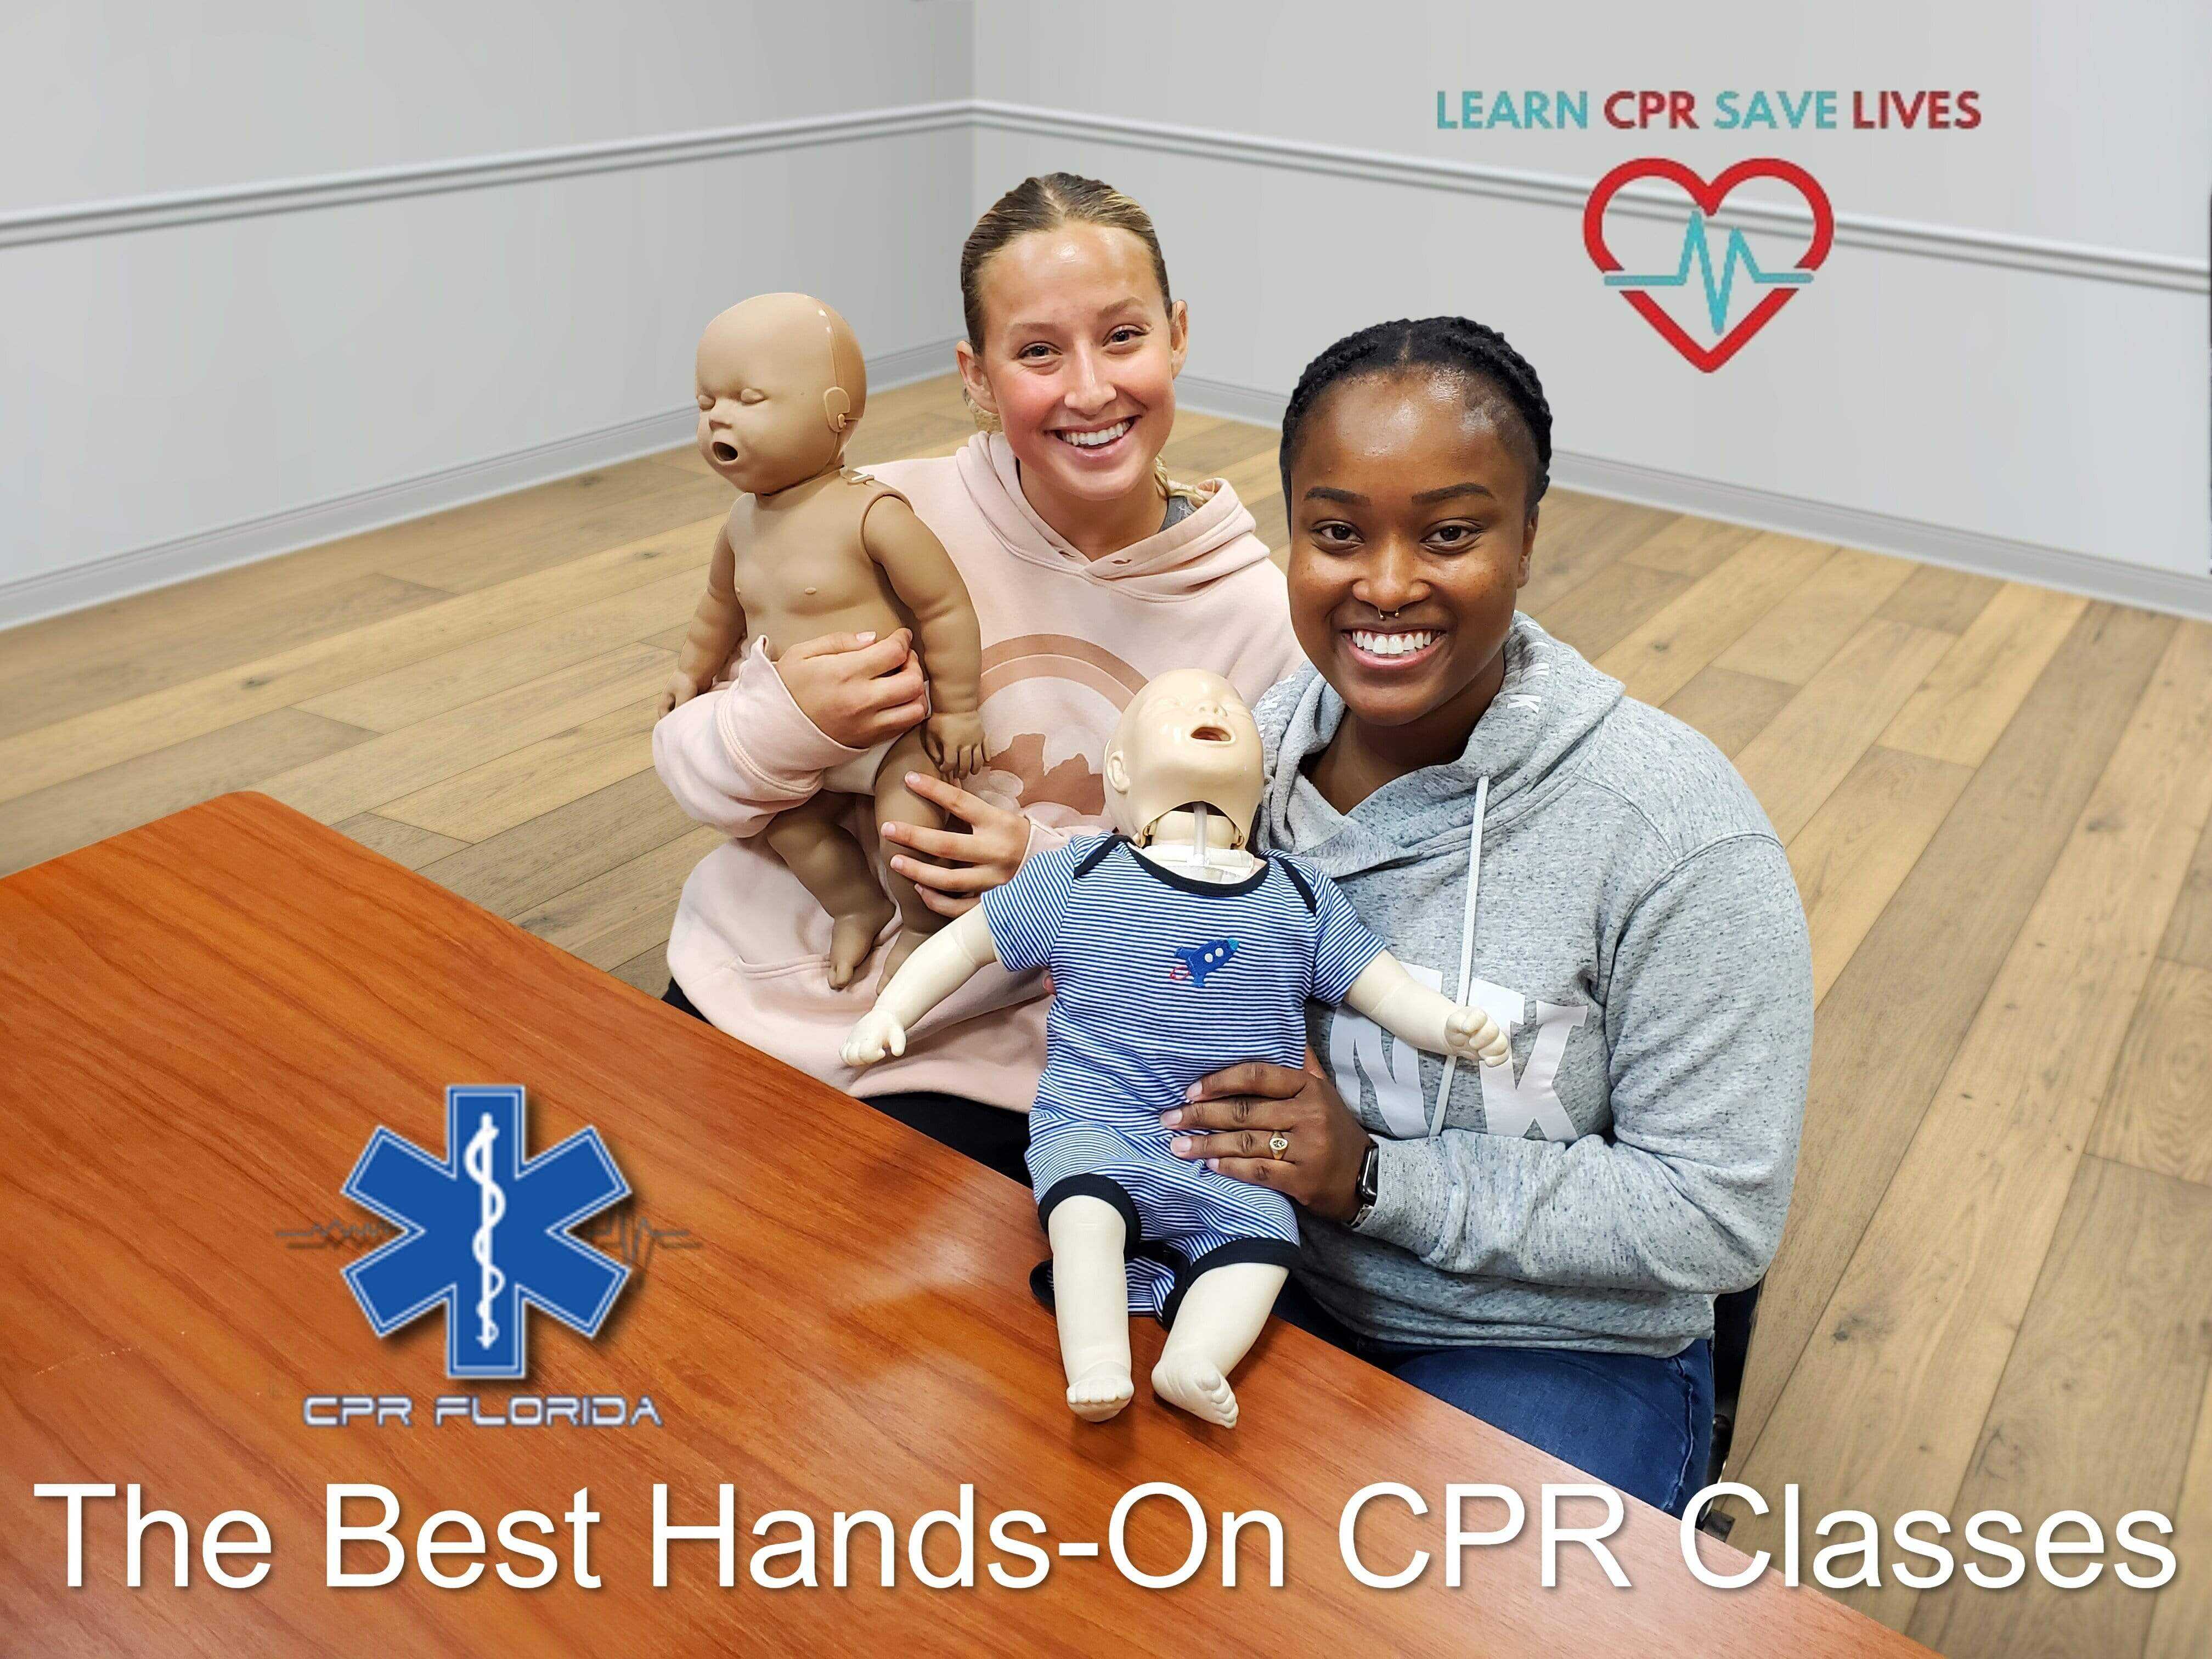 Pompano Beach cpr bls first aid certification classes